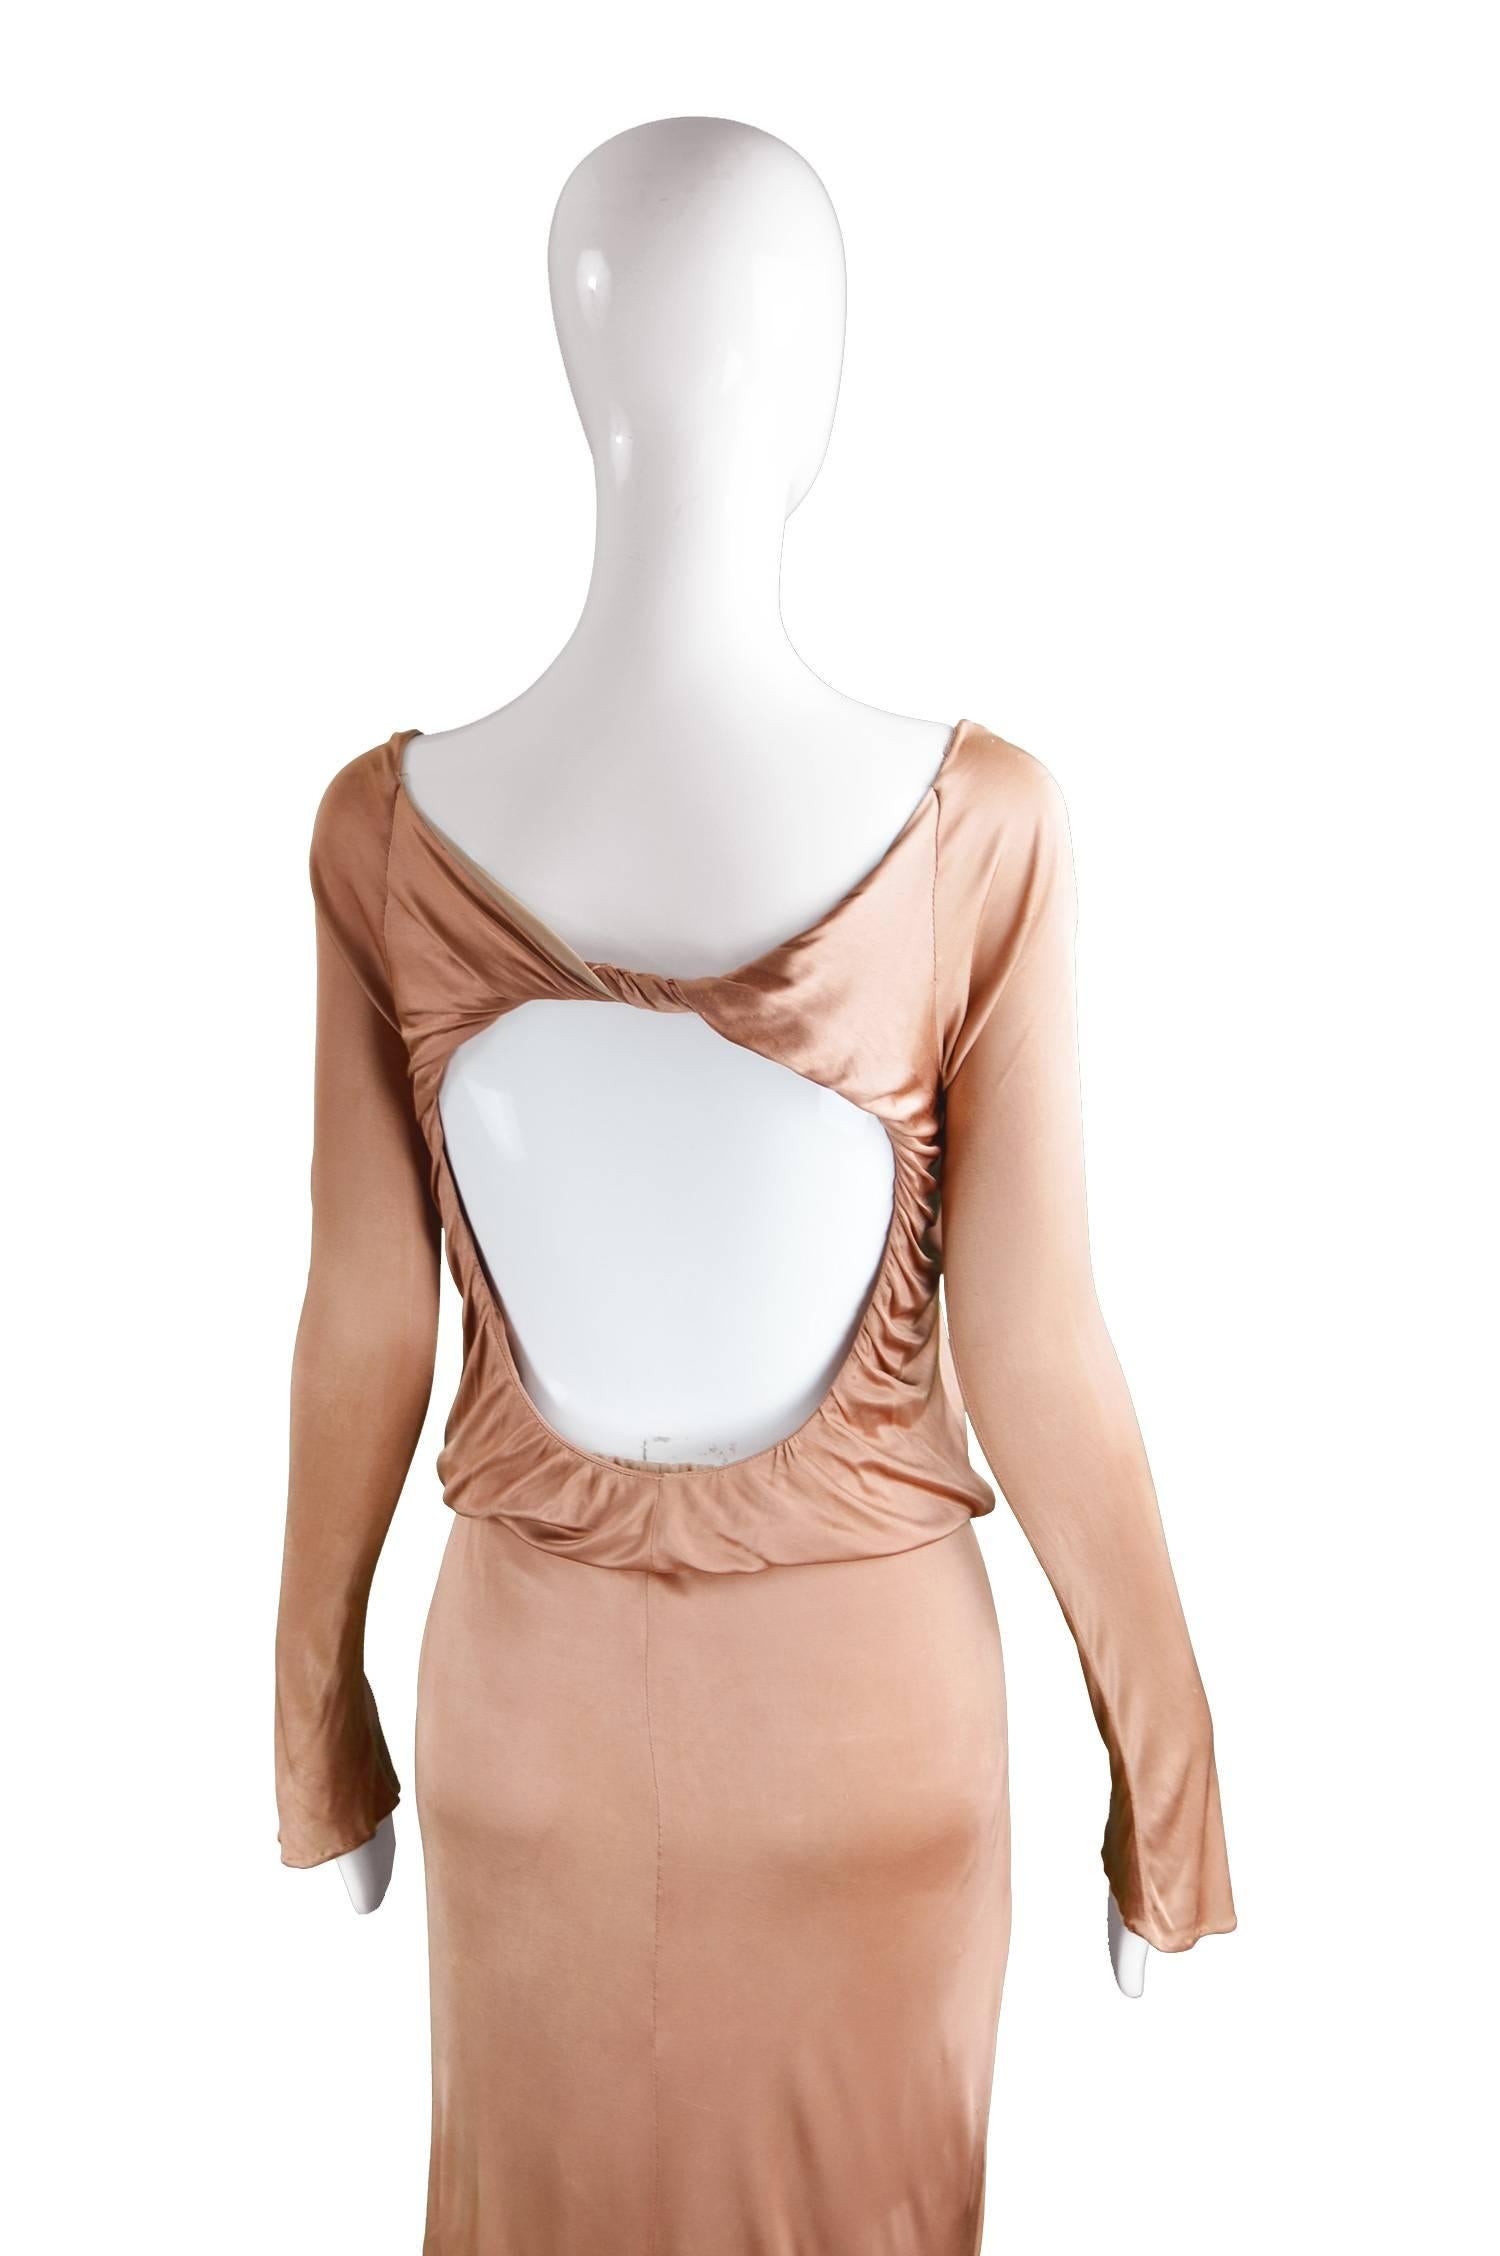 Alexander McQueen Nude Jersey 'Pantheon as Lecum' Jersey Dress, A/W 2004 In Good Condition For Sale In Doncaster, South Yorkshire